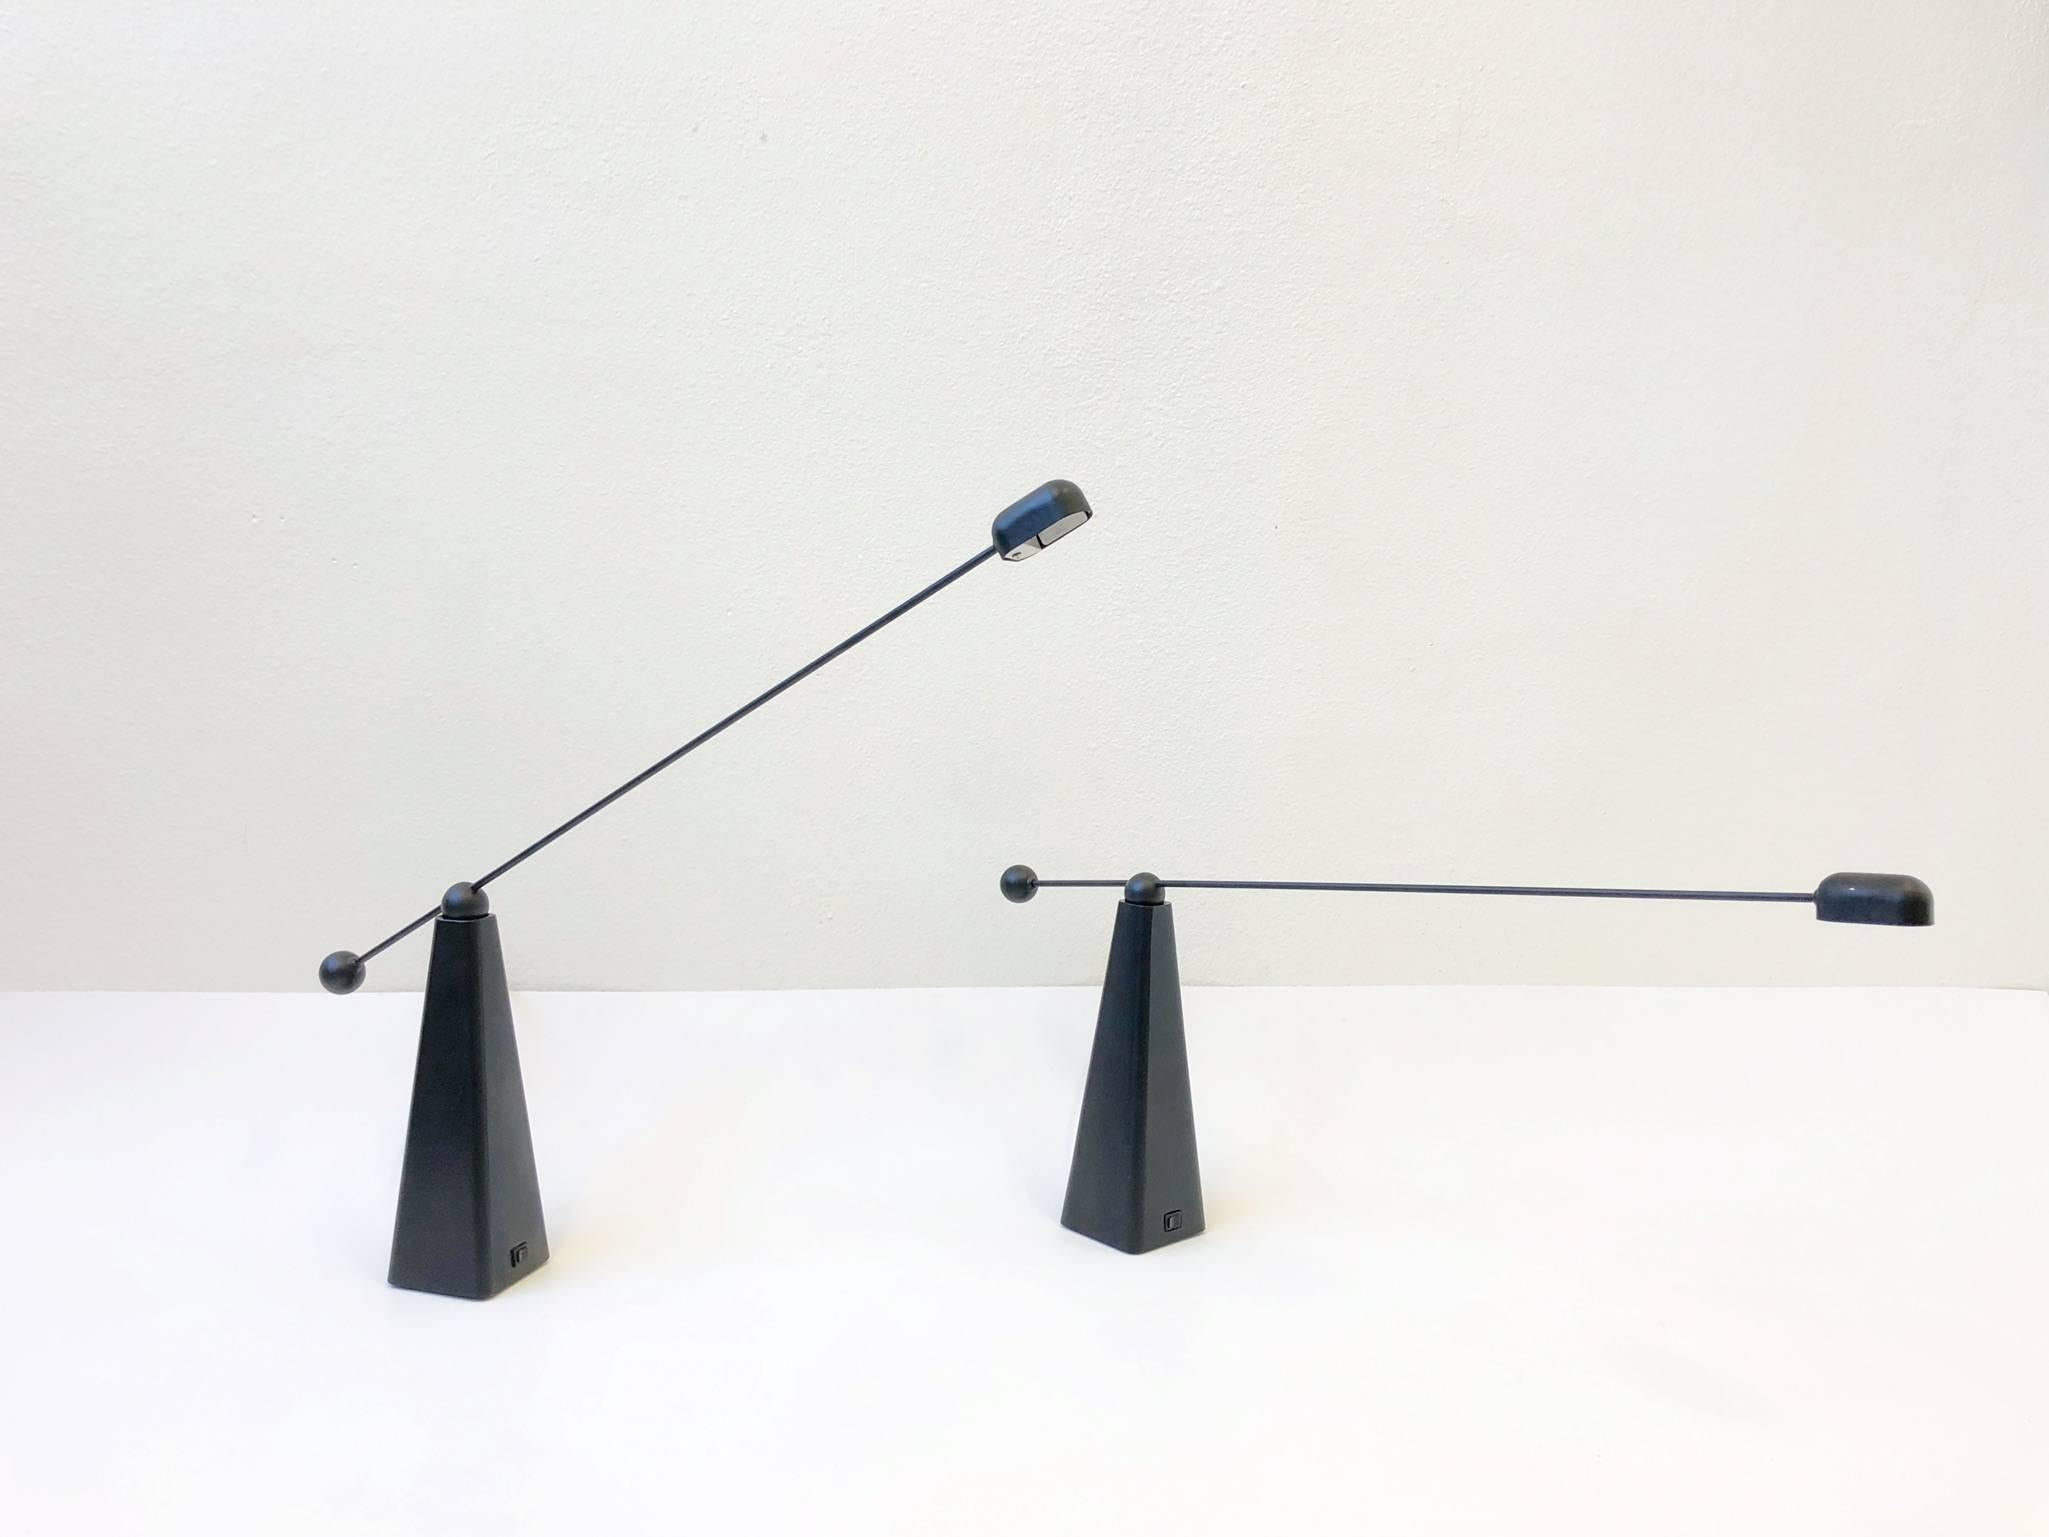 An amazing pair of 1980s black lacquered adjustable table lamps by Ron Rezek.
The lamps are in amazing condition. They have a high/low dimmer and take a small 50w halogen bulb. The arm rotates 360, and move up and down.

Dimension: 32” wide 4”